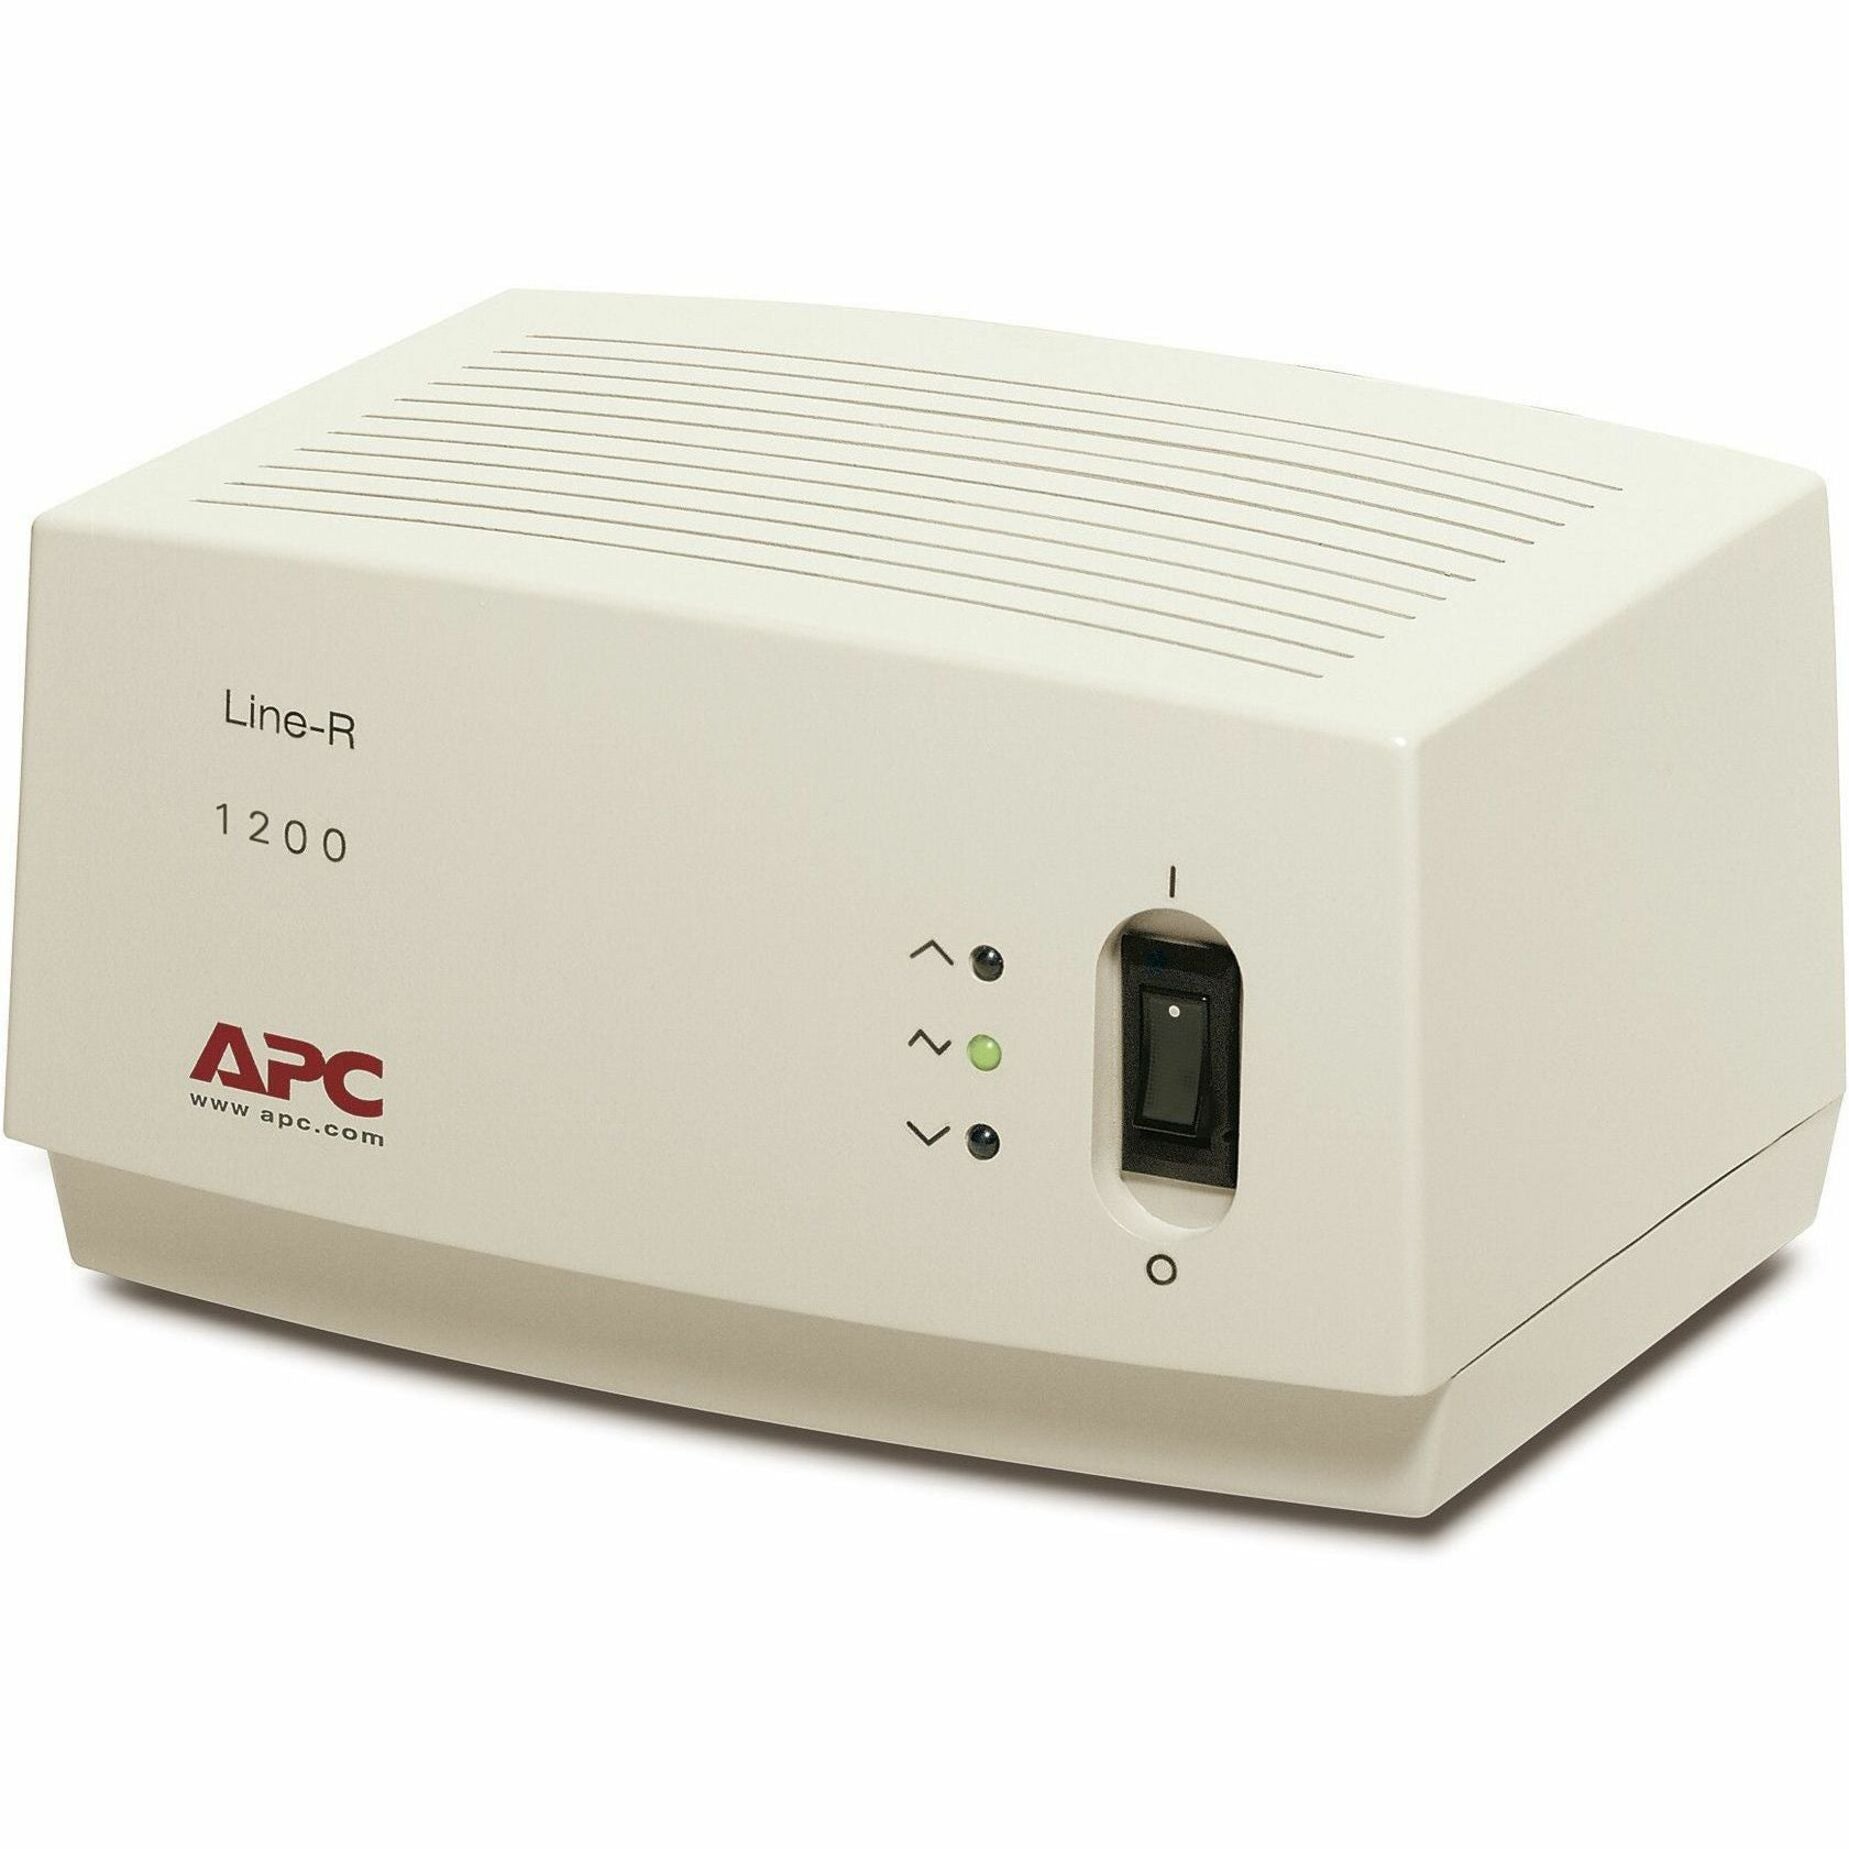 APC LE1200 Line-R 1200VA Line Conditioner With AVR, Protects Against Over Voltage, Surges, and Brownouts